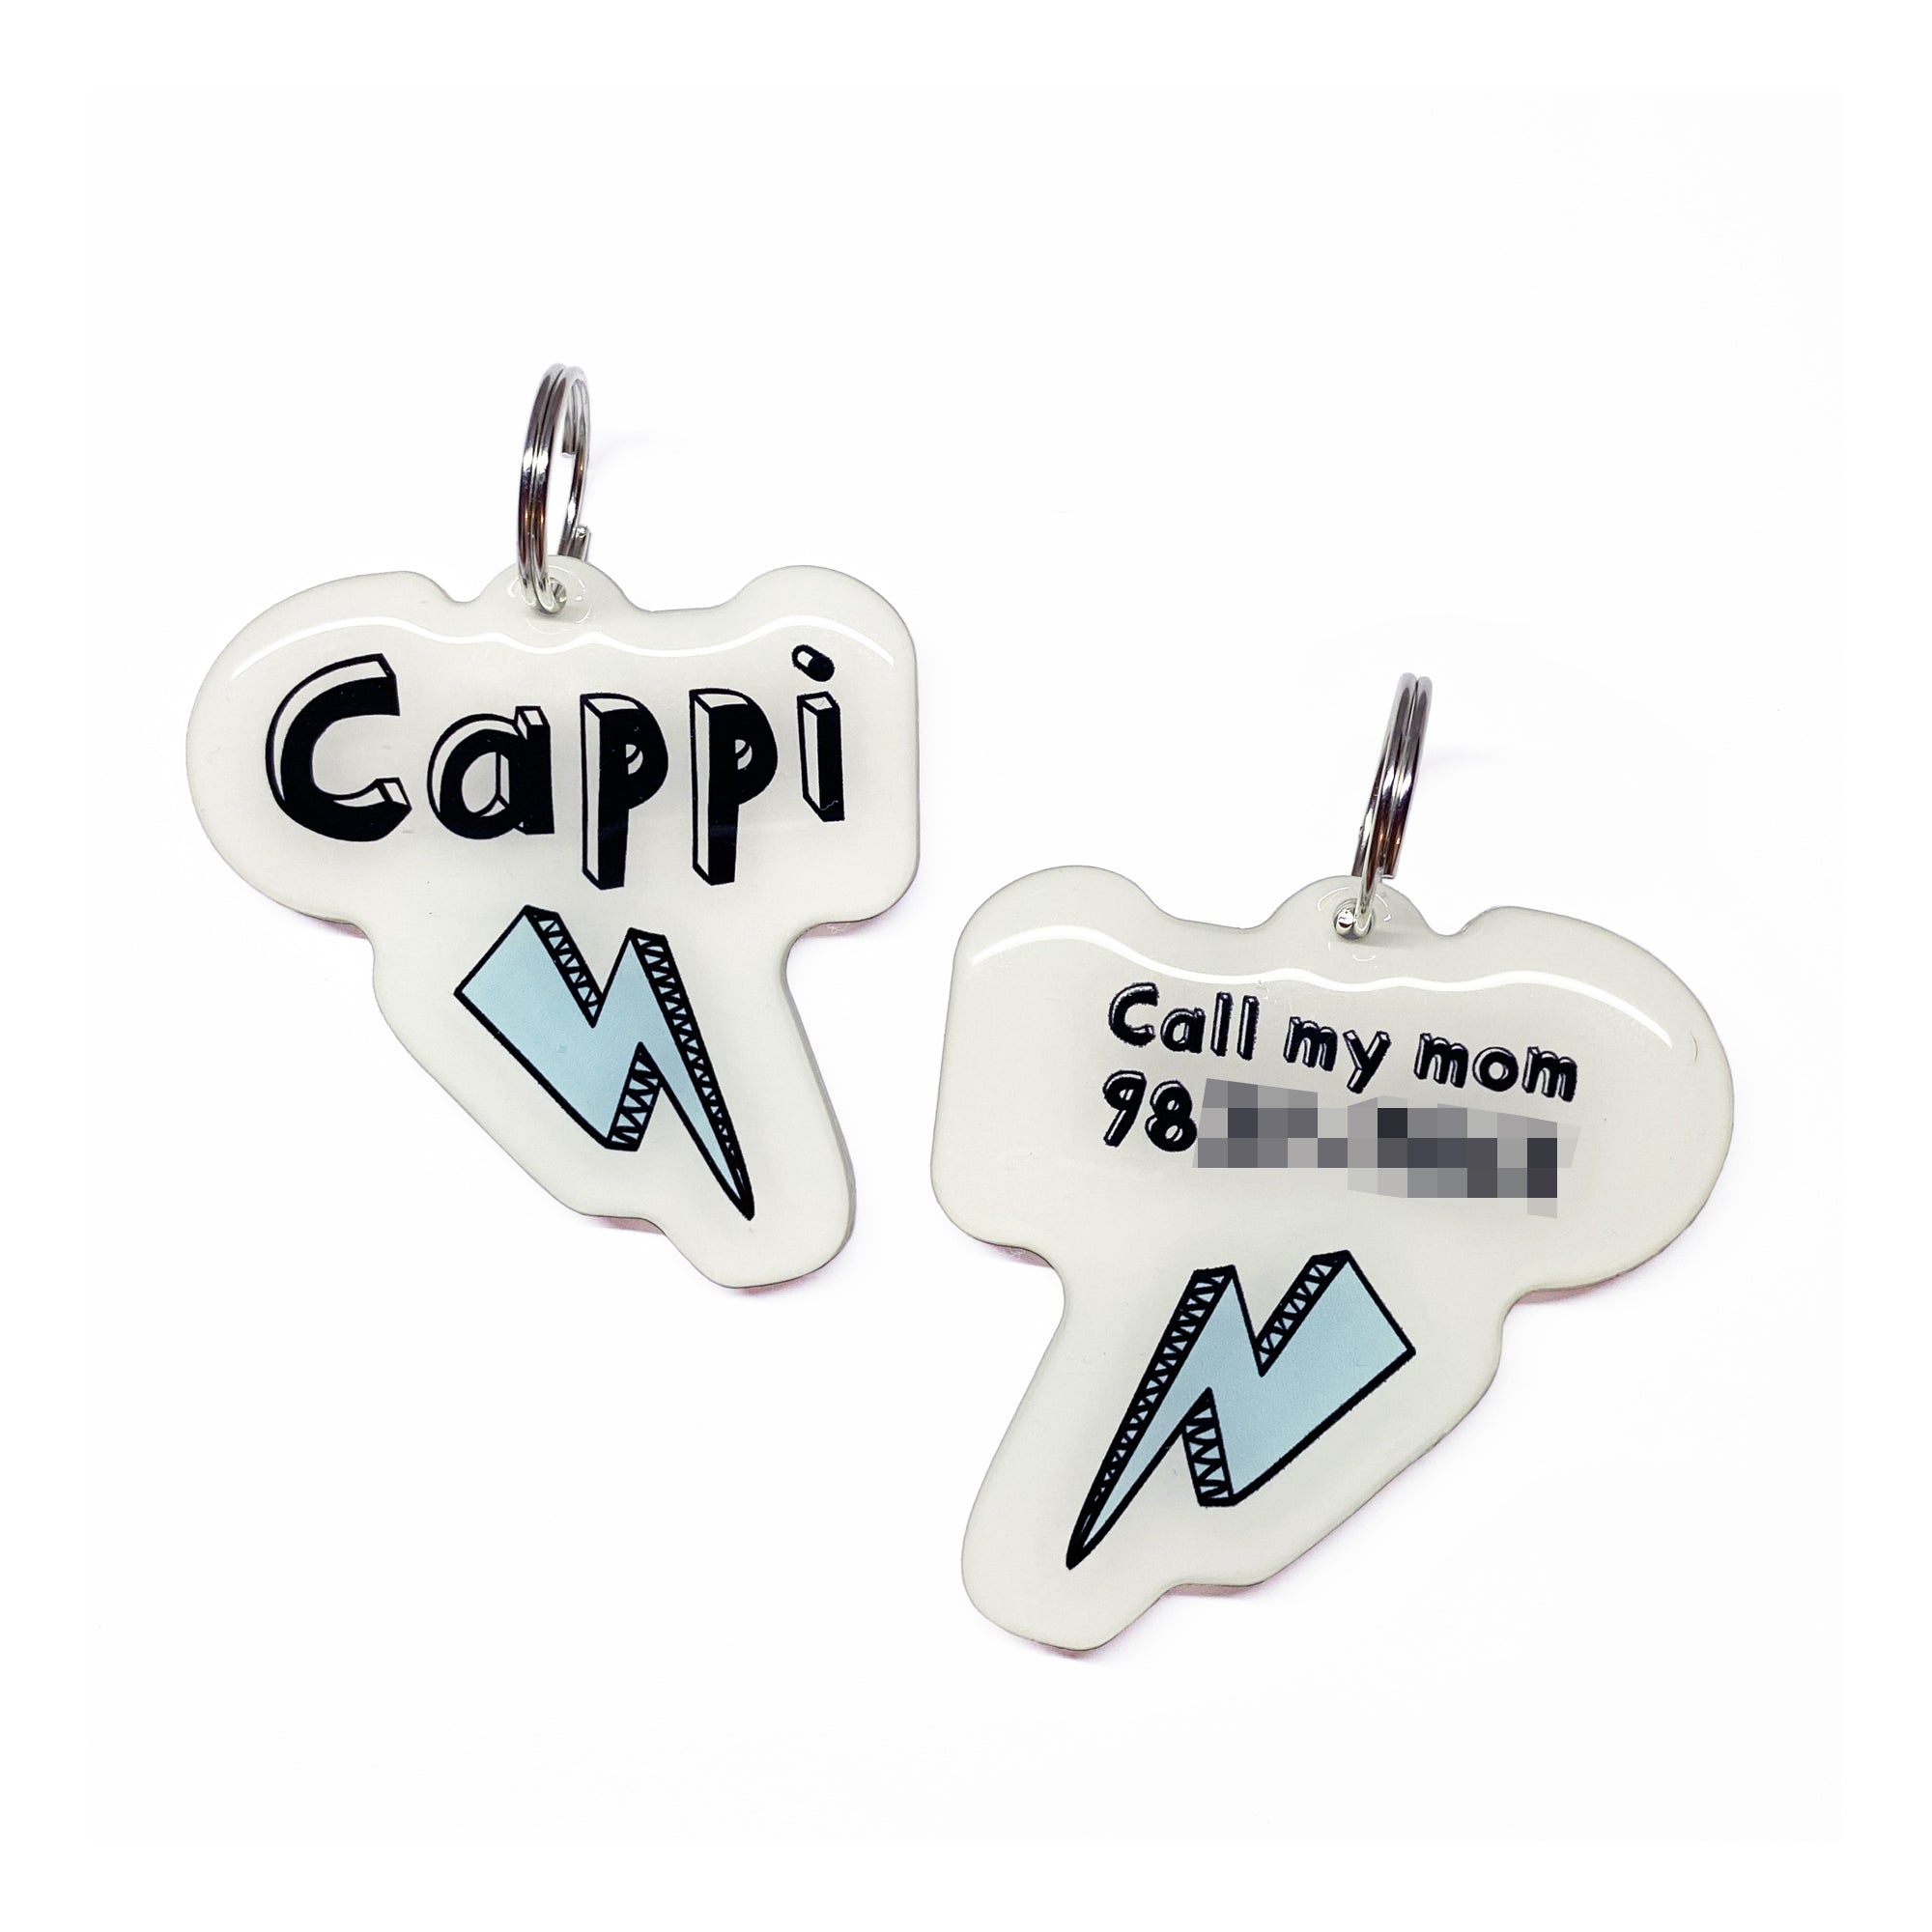 White + Baby Blue Lightning Bolt - 2x Tags Dog Name Tags by Bashtags